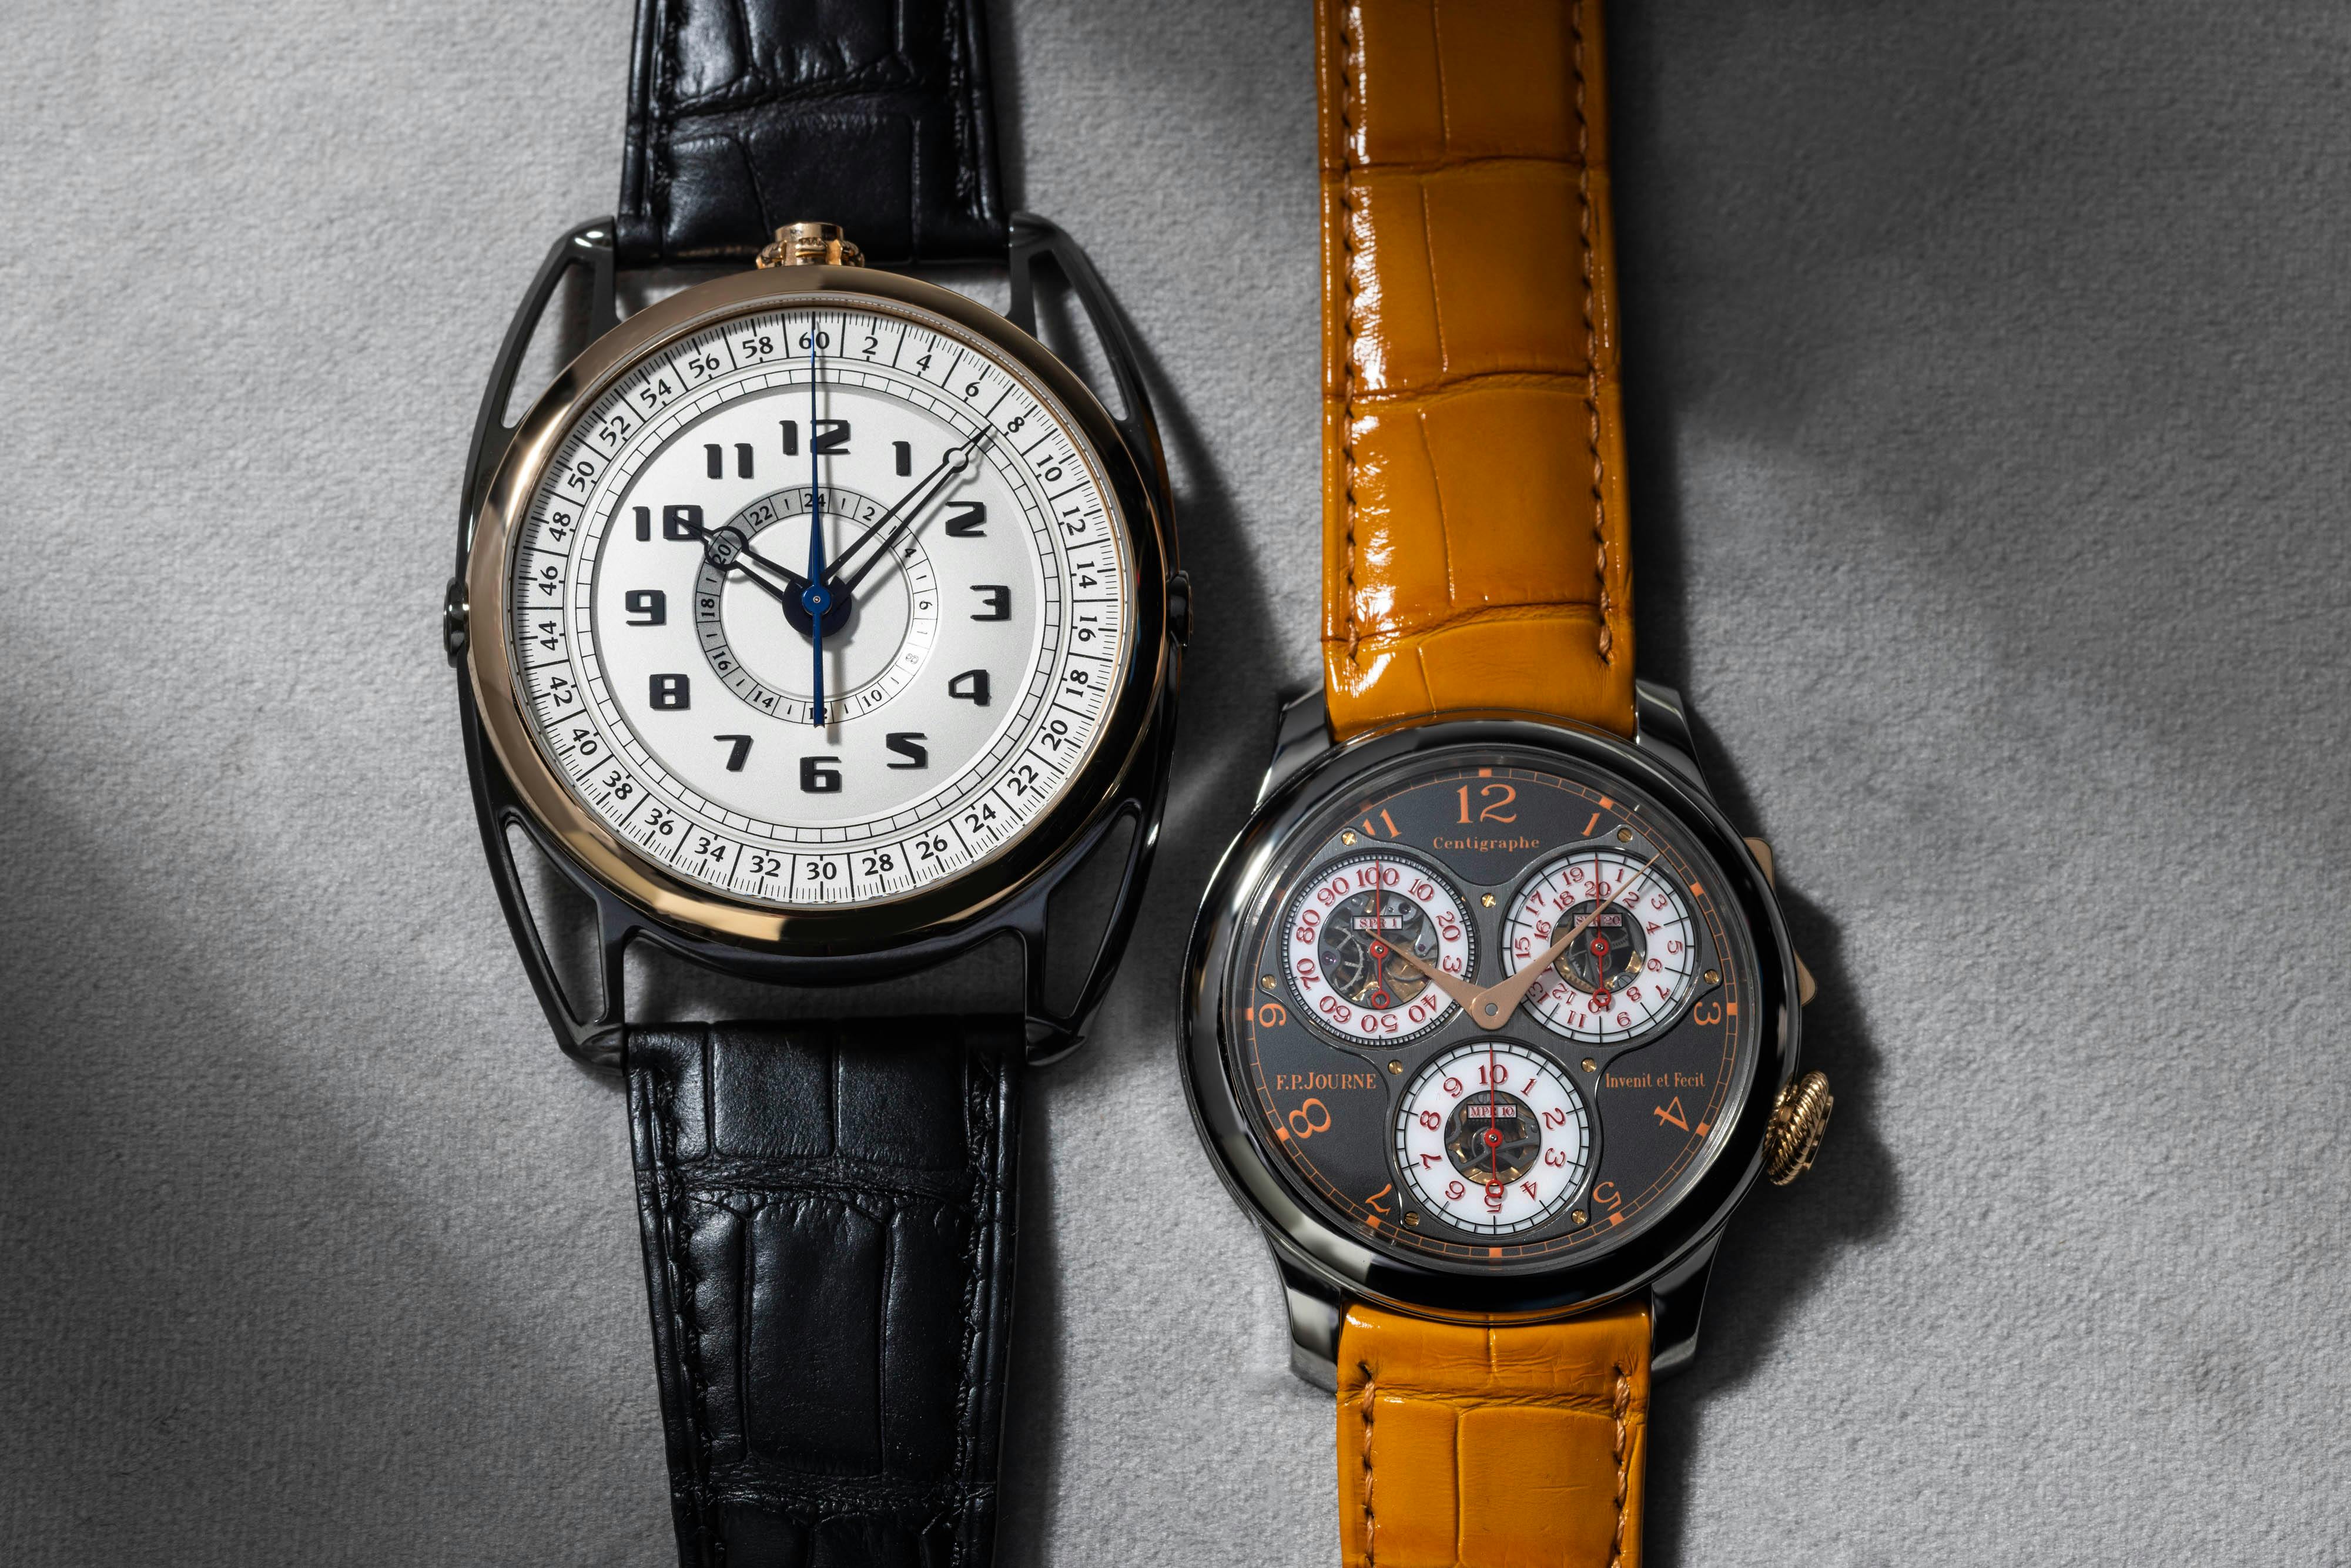 A De Bethune and F.P. Journe side by side